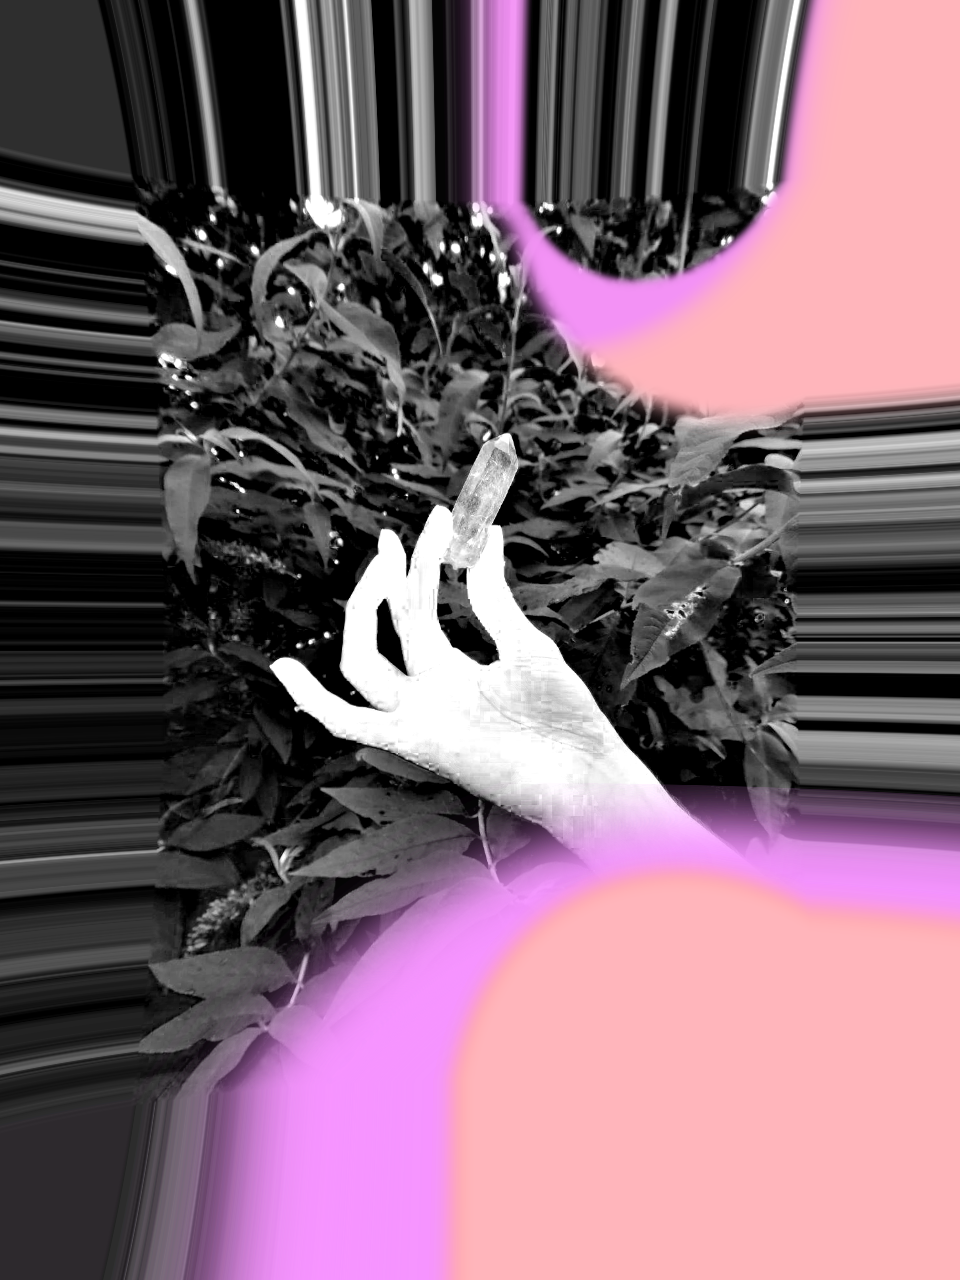 A glitched photo of a hand holding a single quartz crystal, in front of a leavy bush. The photo is mainly black and white, with some pink and apricot accents.